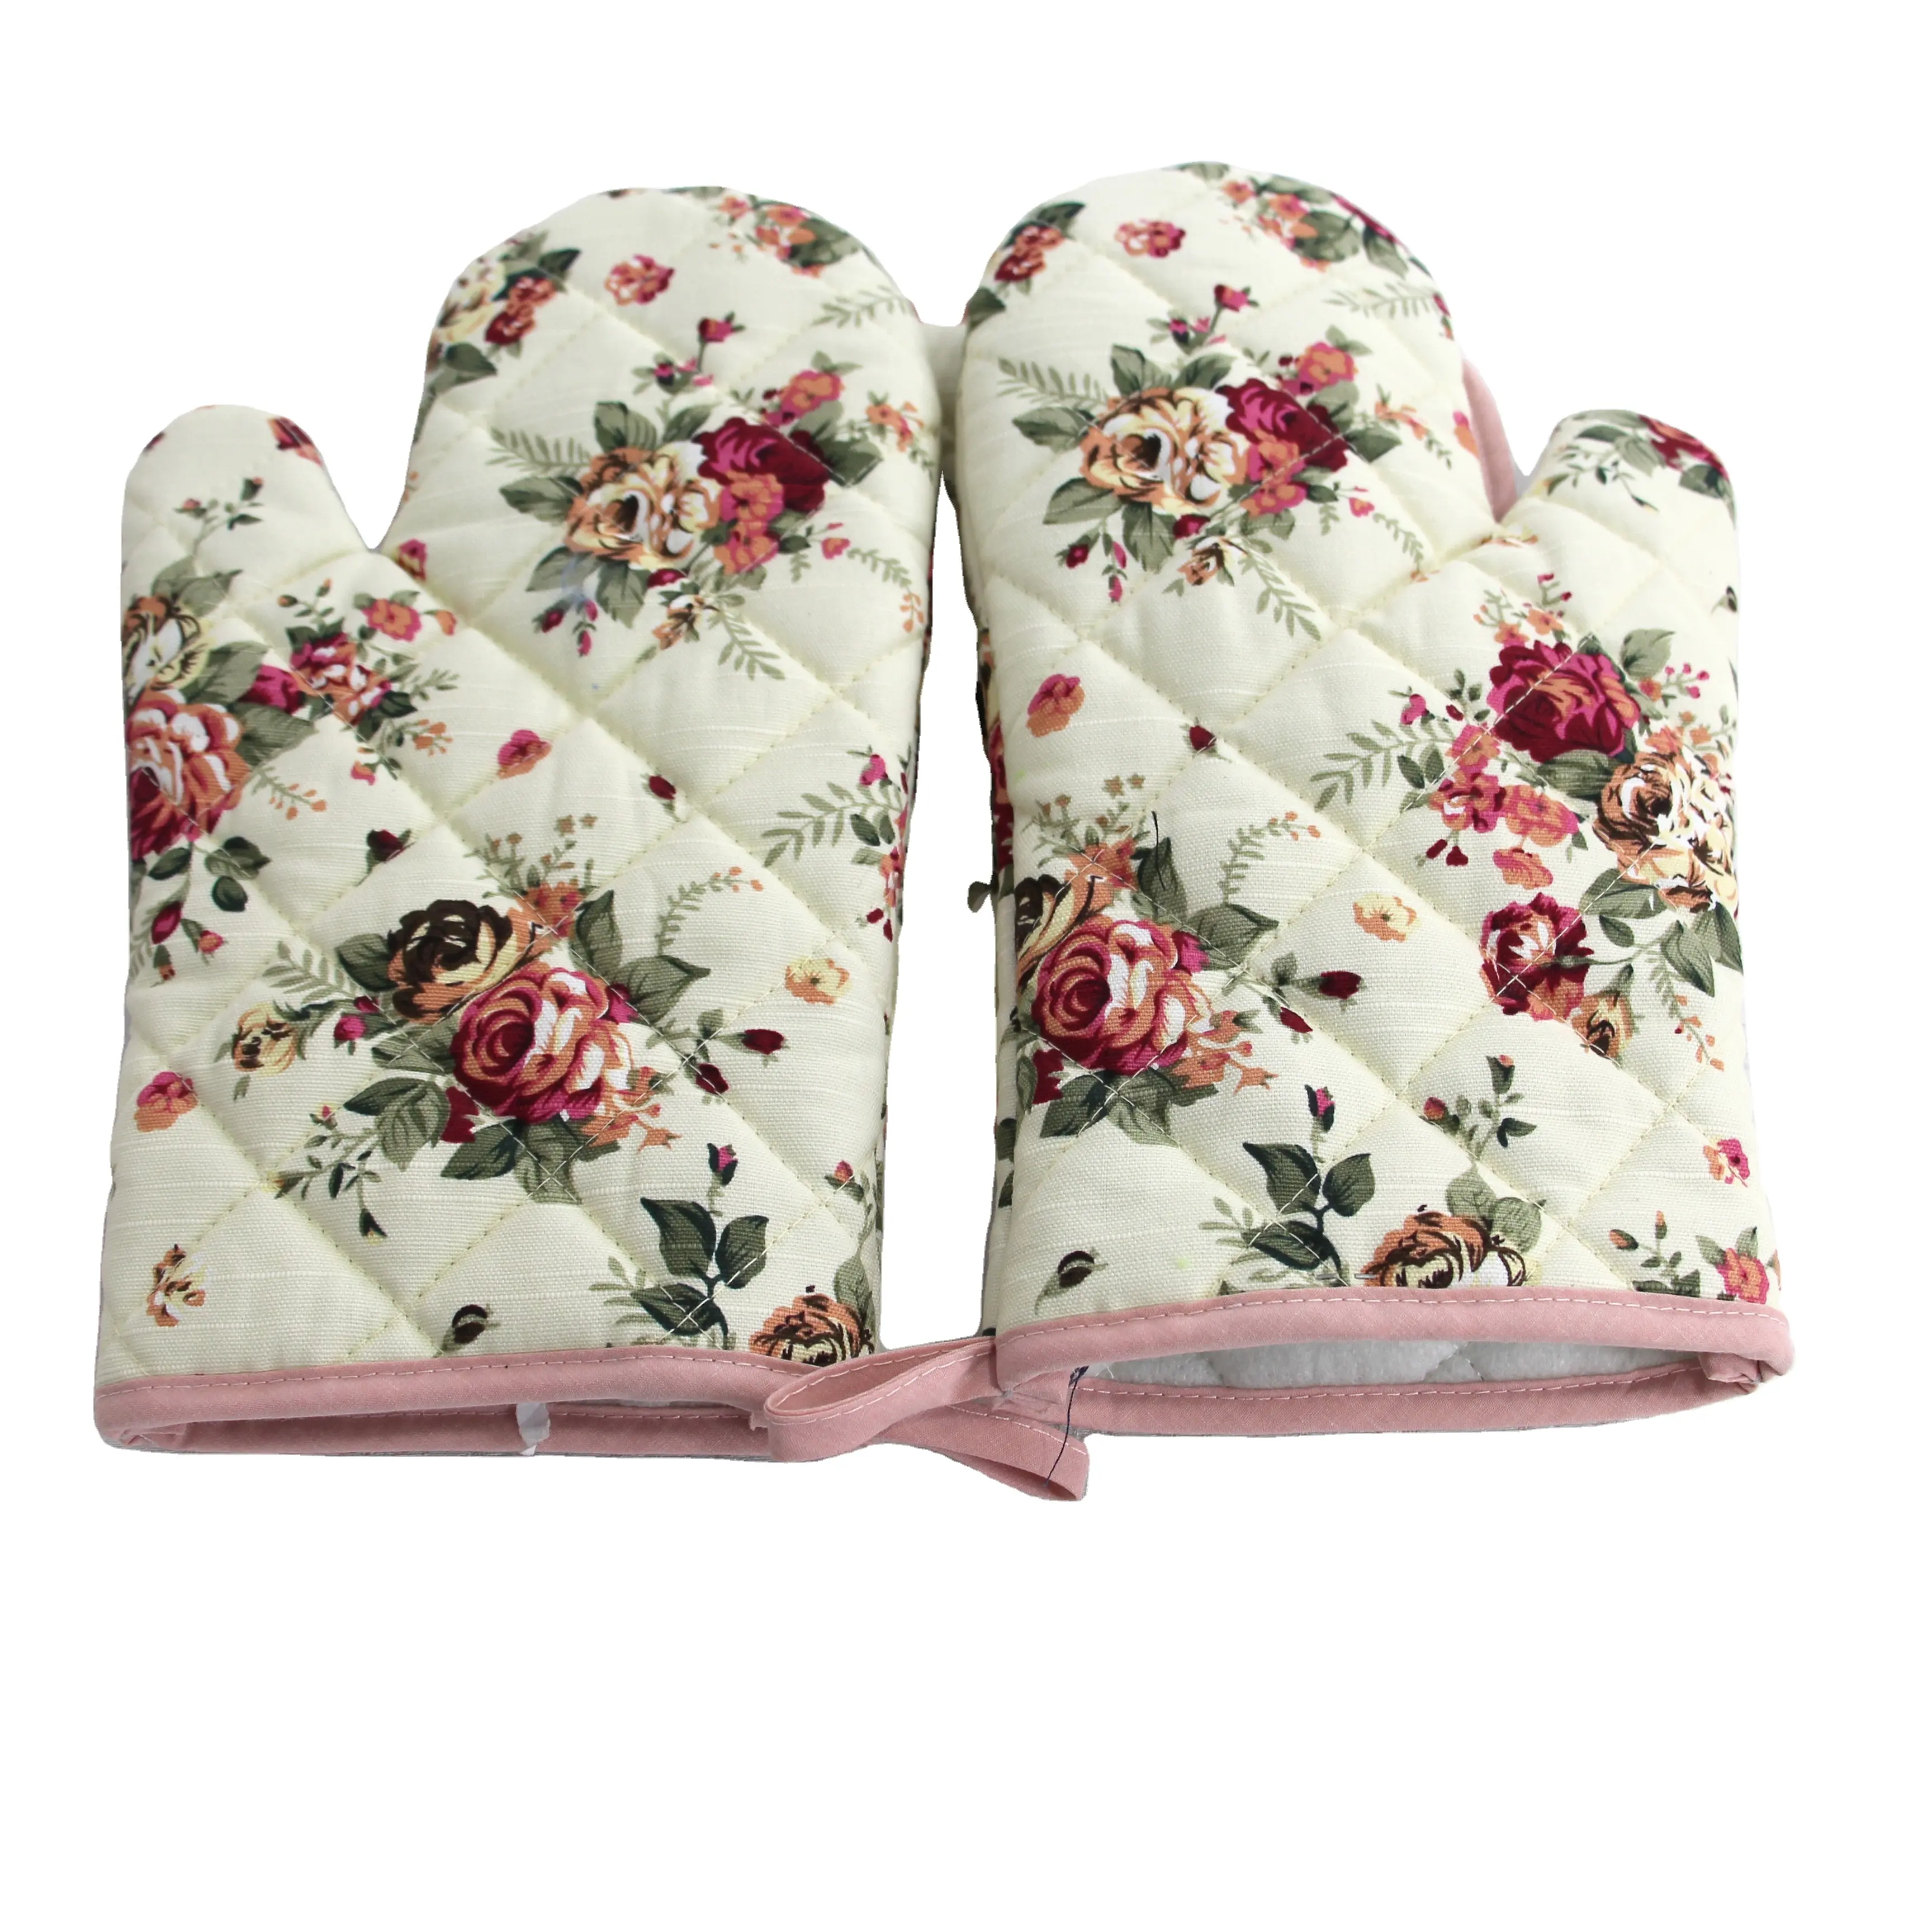 Yellow Floral Custom Cotton Printed Thickened Heat Resistant Microwave Cooking Kitchen Pot Holder Oven Mitt